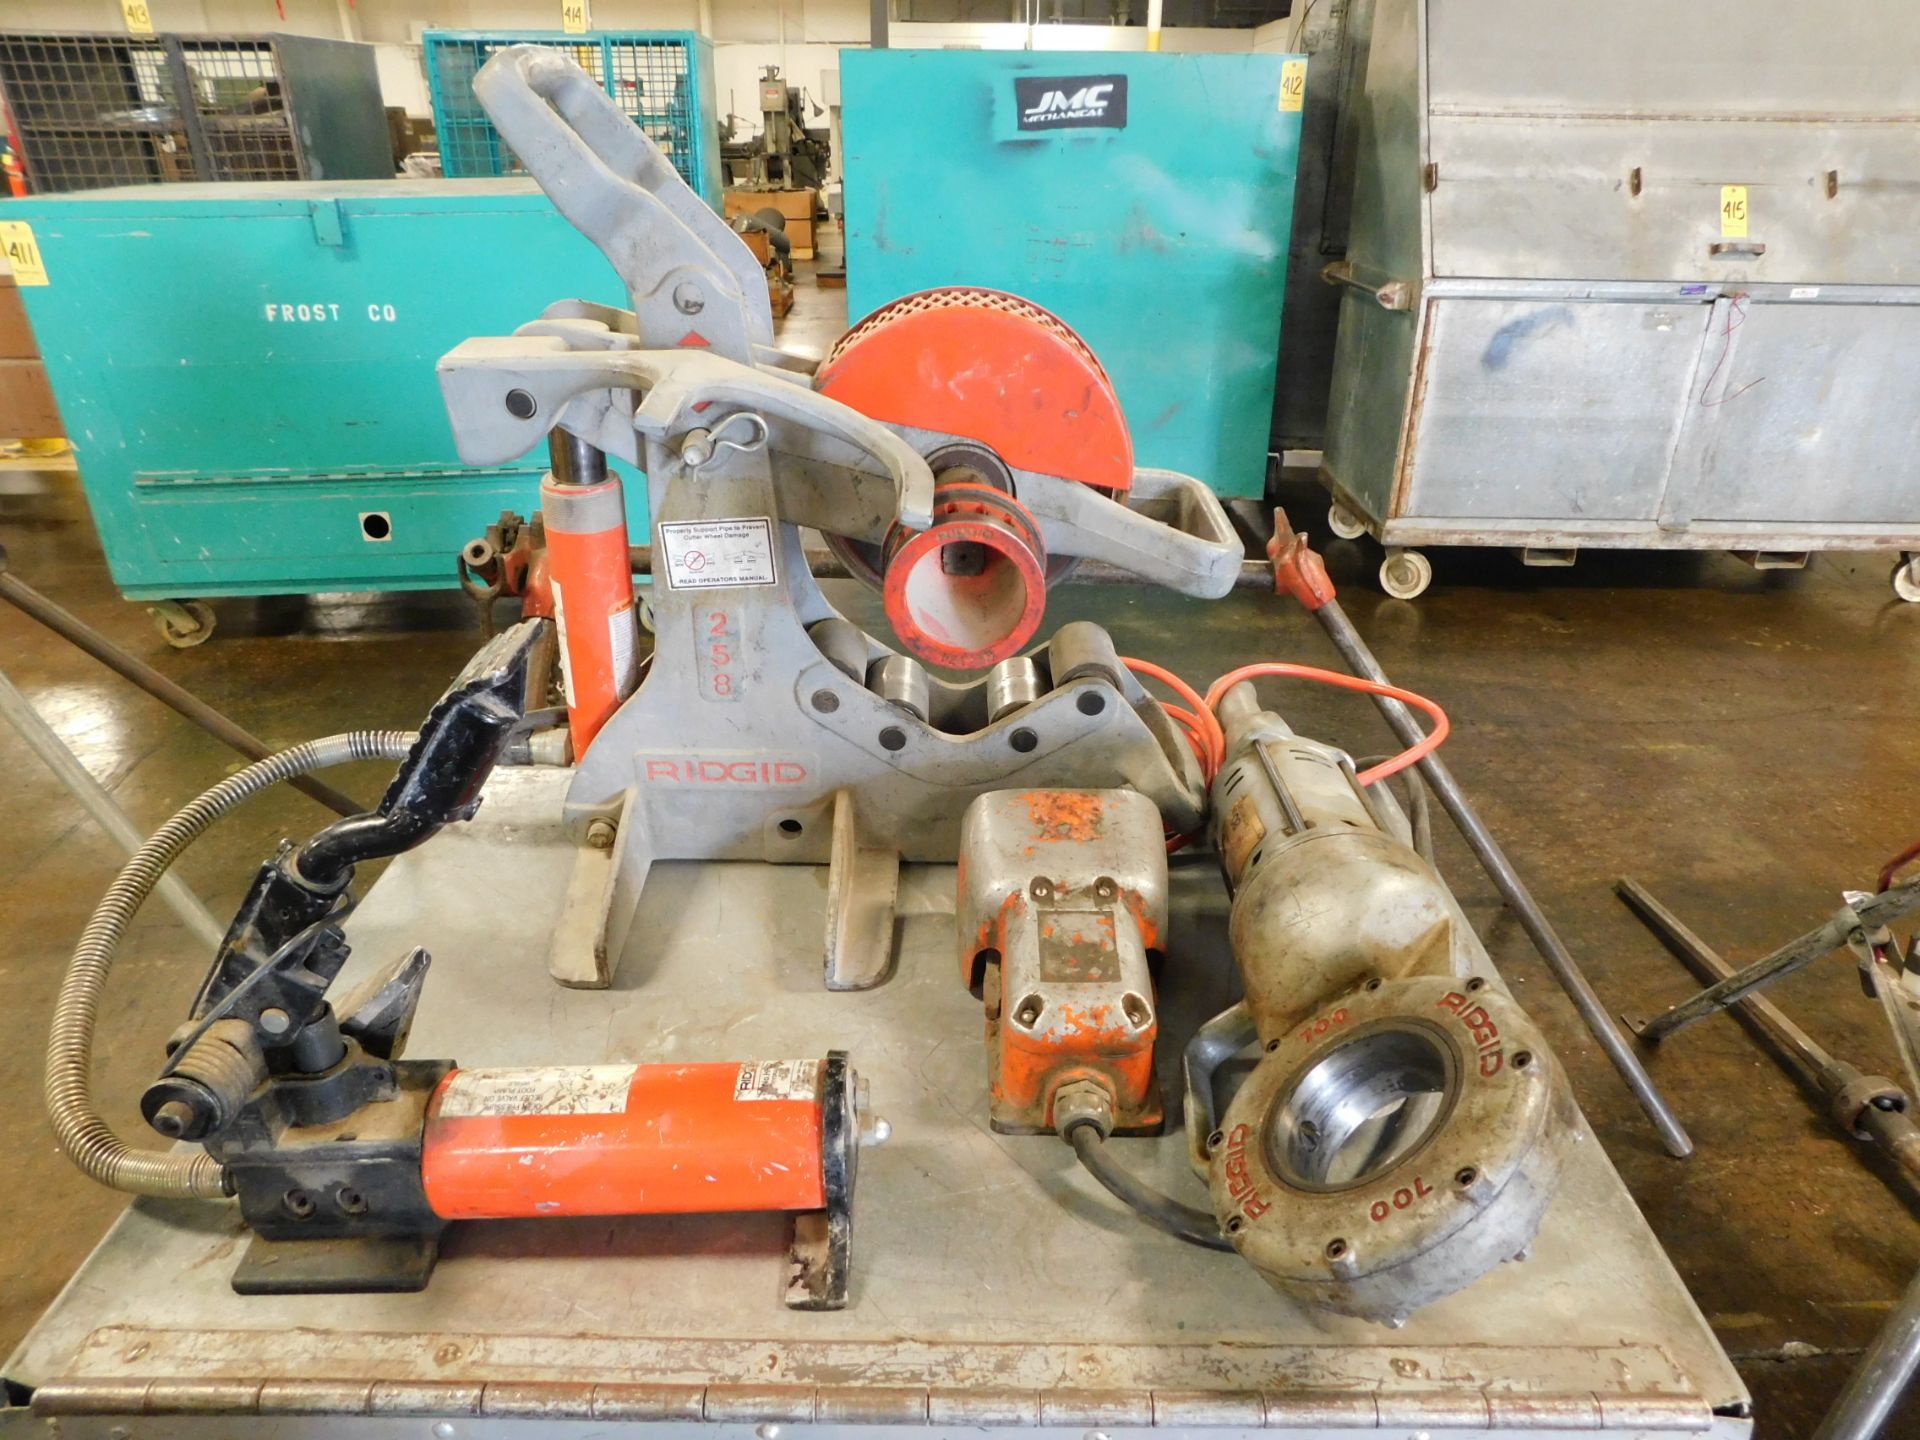 Ridgid No. 258 Hydraulic Pipe Cutter with Ridgid 700 Hand Held Power Unit and Foot Pedal